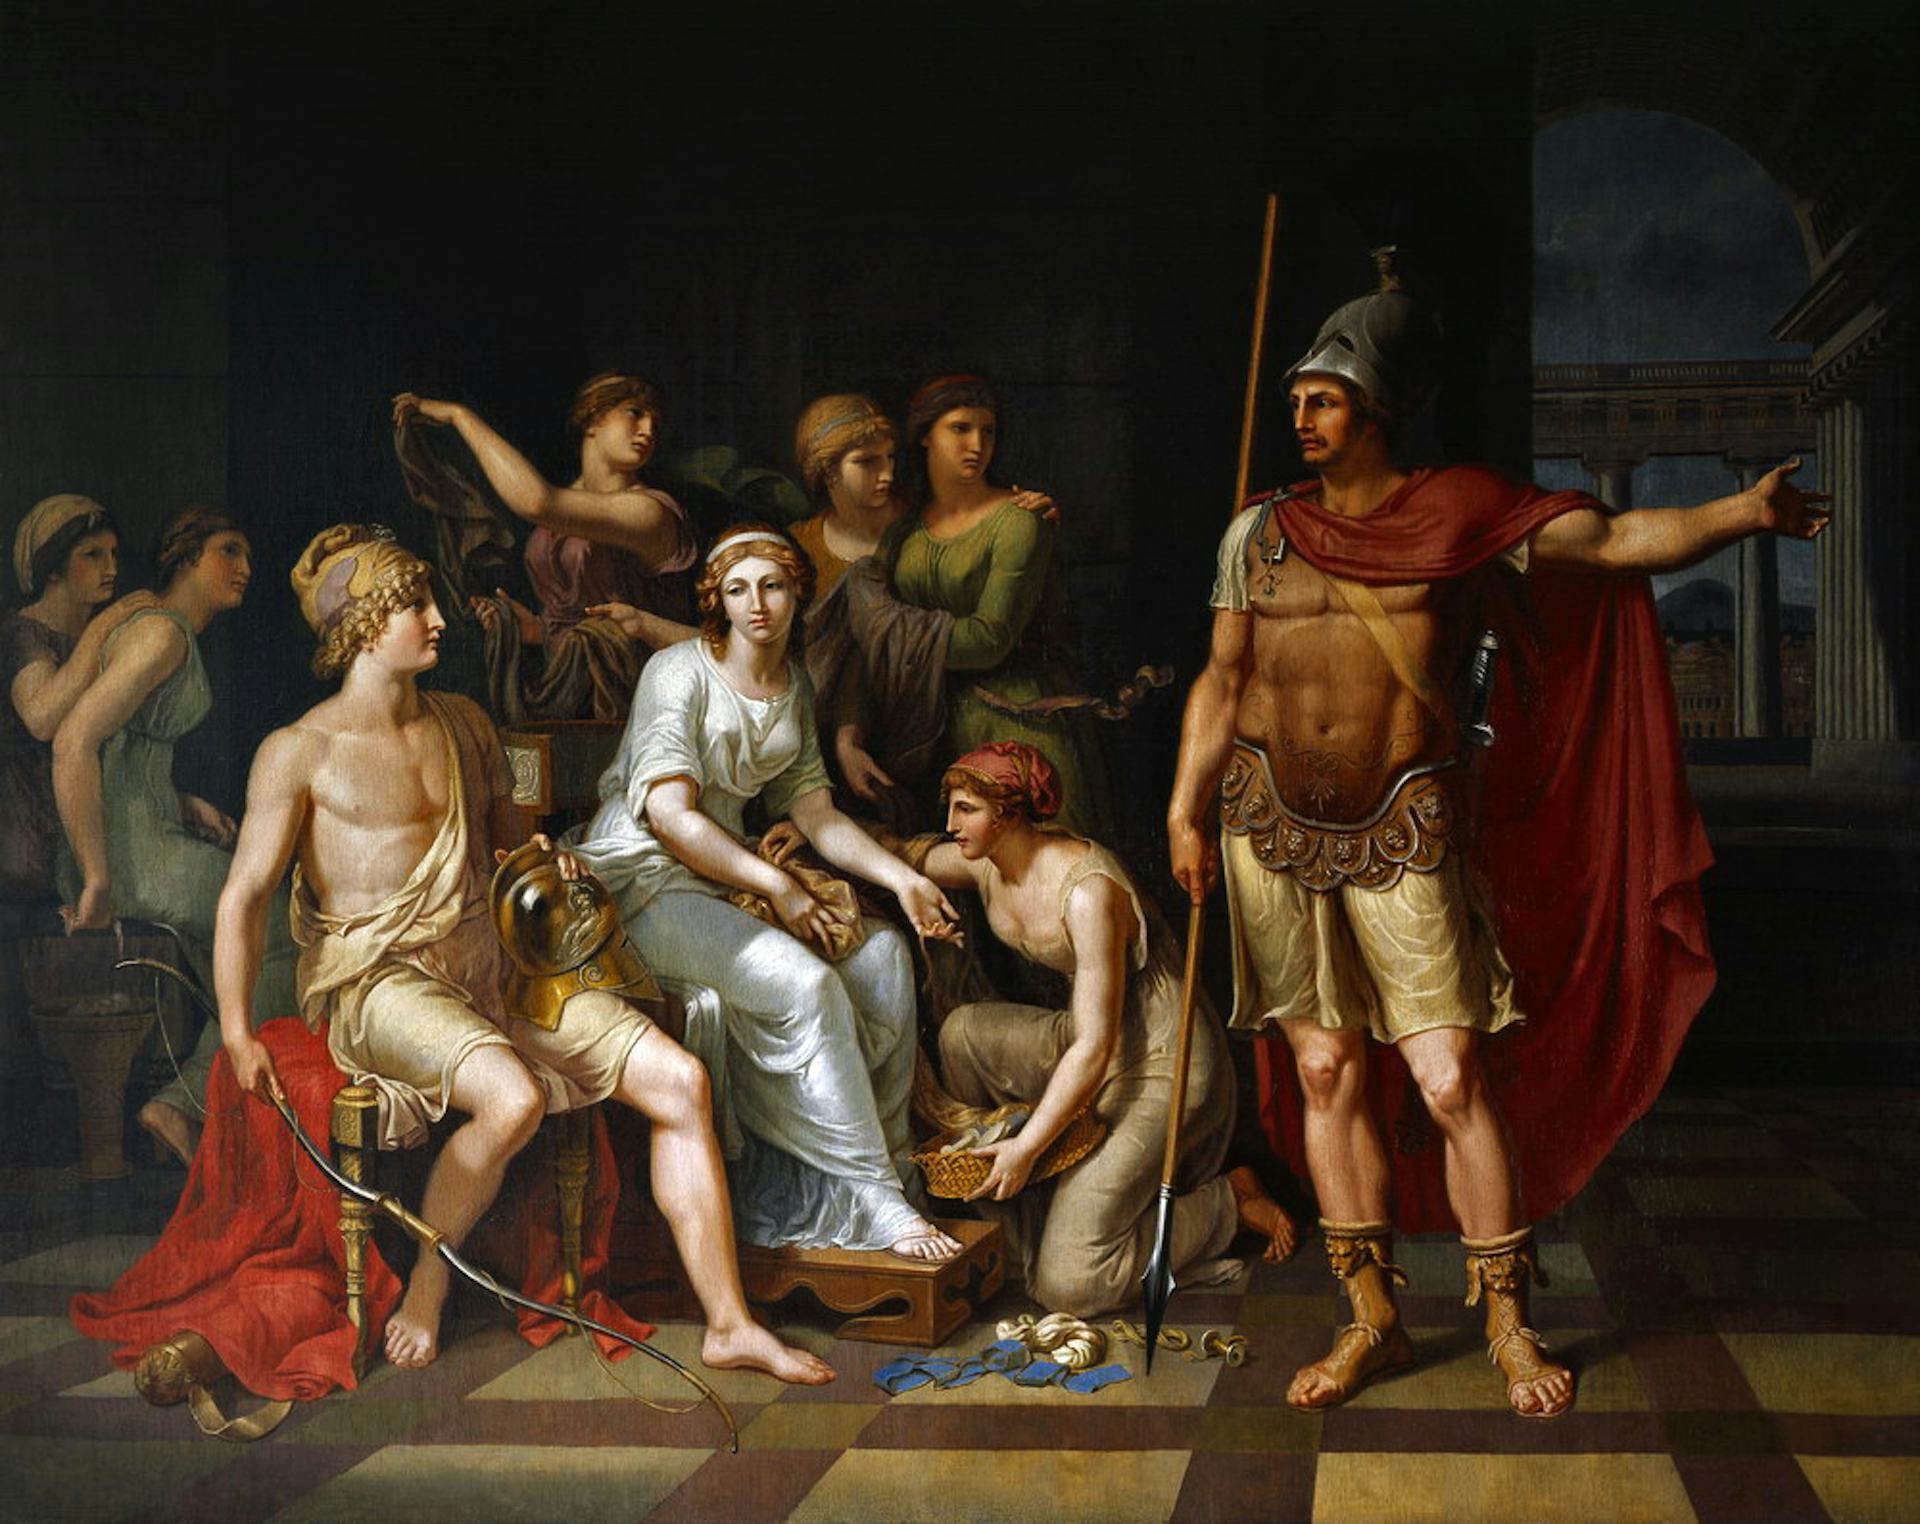 Achilles, Myth, Meaning, Significance, & Trojan War